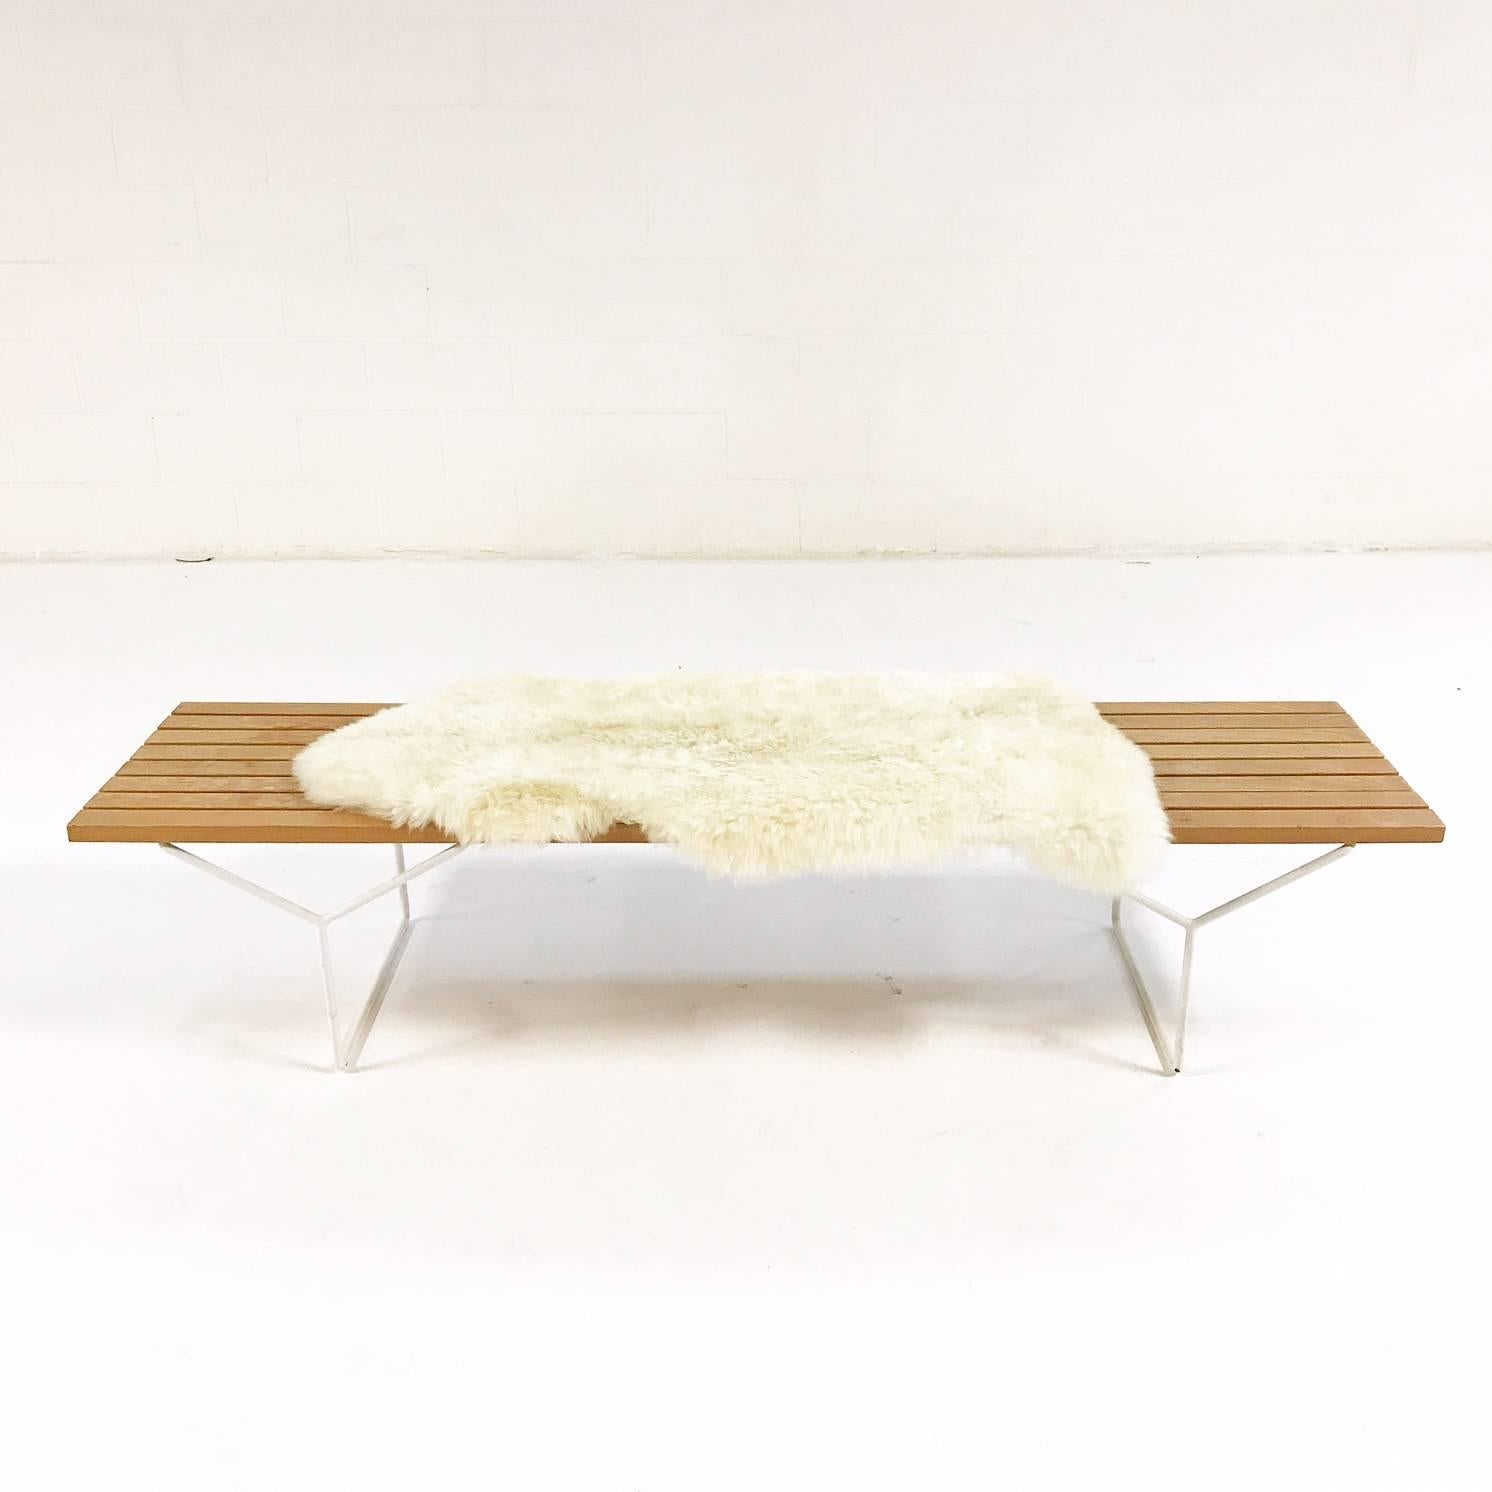 Vintage early Harry Bertoia for knoll slat bench, model number 400 with Brazilian sheepskin

This is a very cool vintage, circa 1952 Harry Bertoia for Knoll Slat Bench, Model number 400. We added one of our beautiful Brazilian sheepskins for a